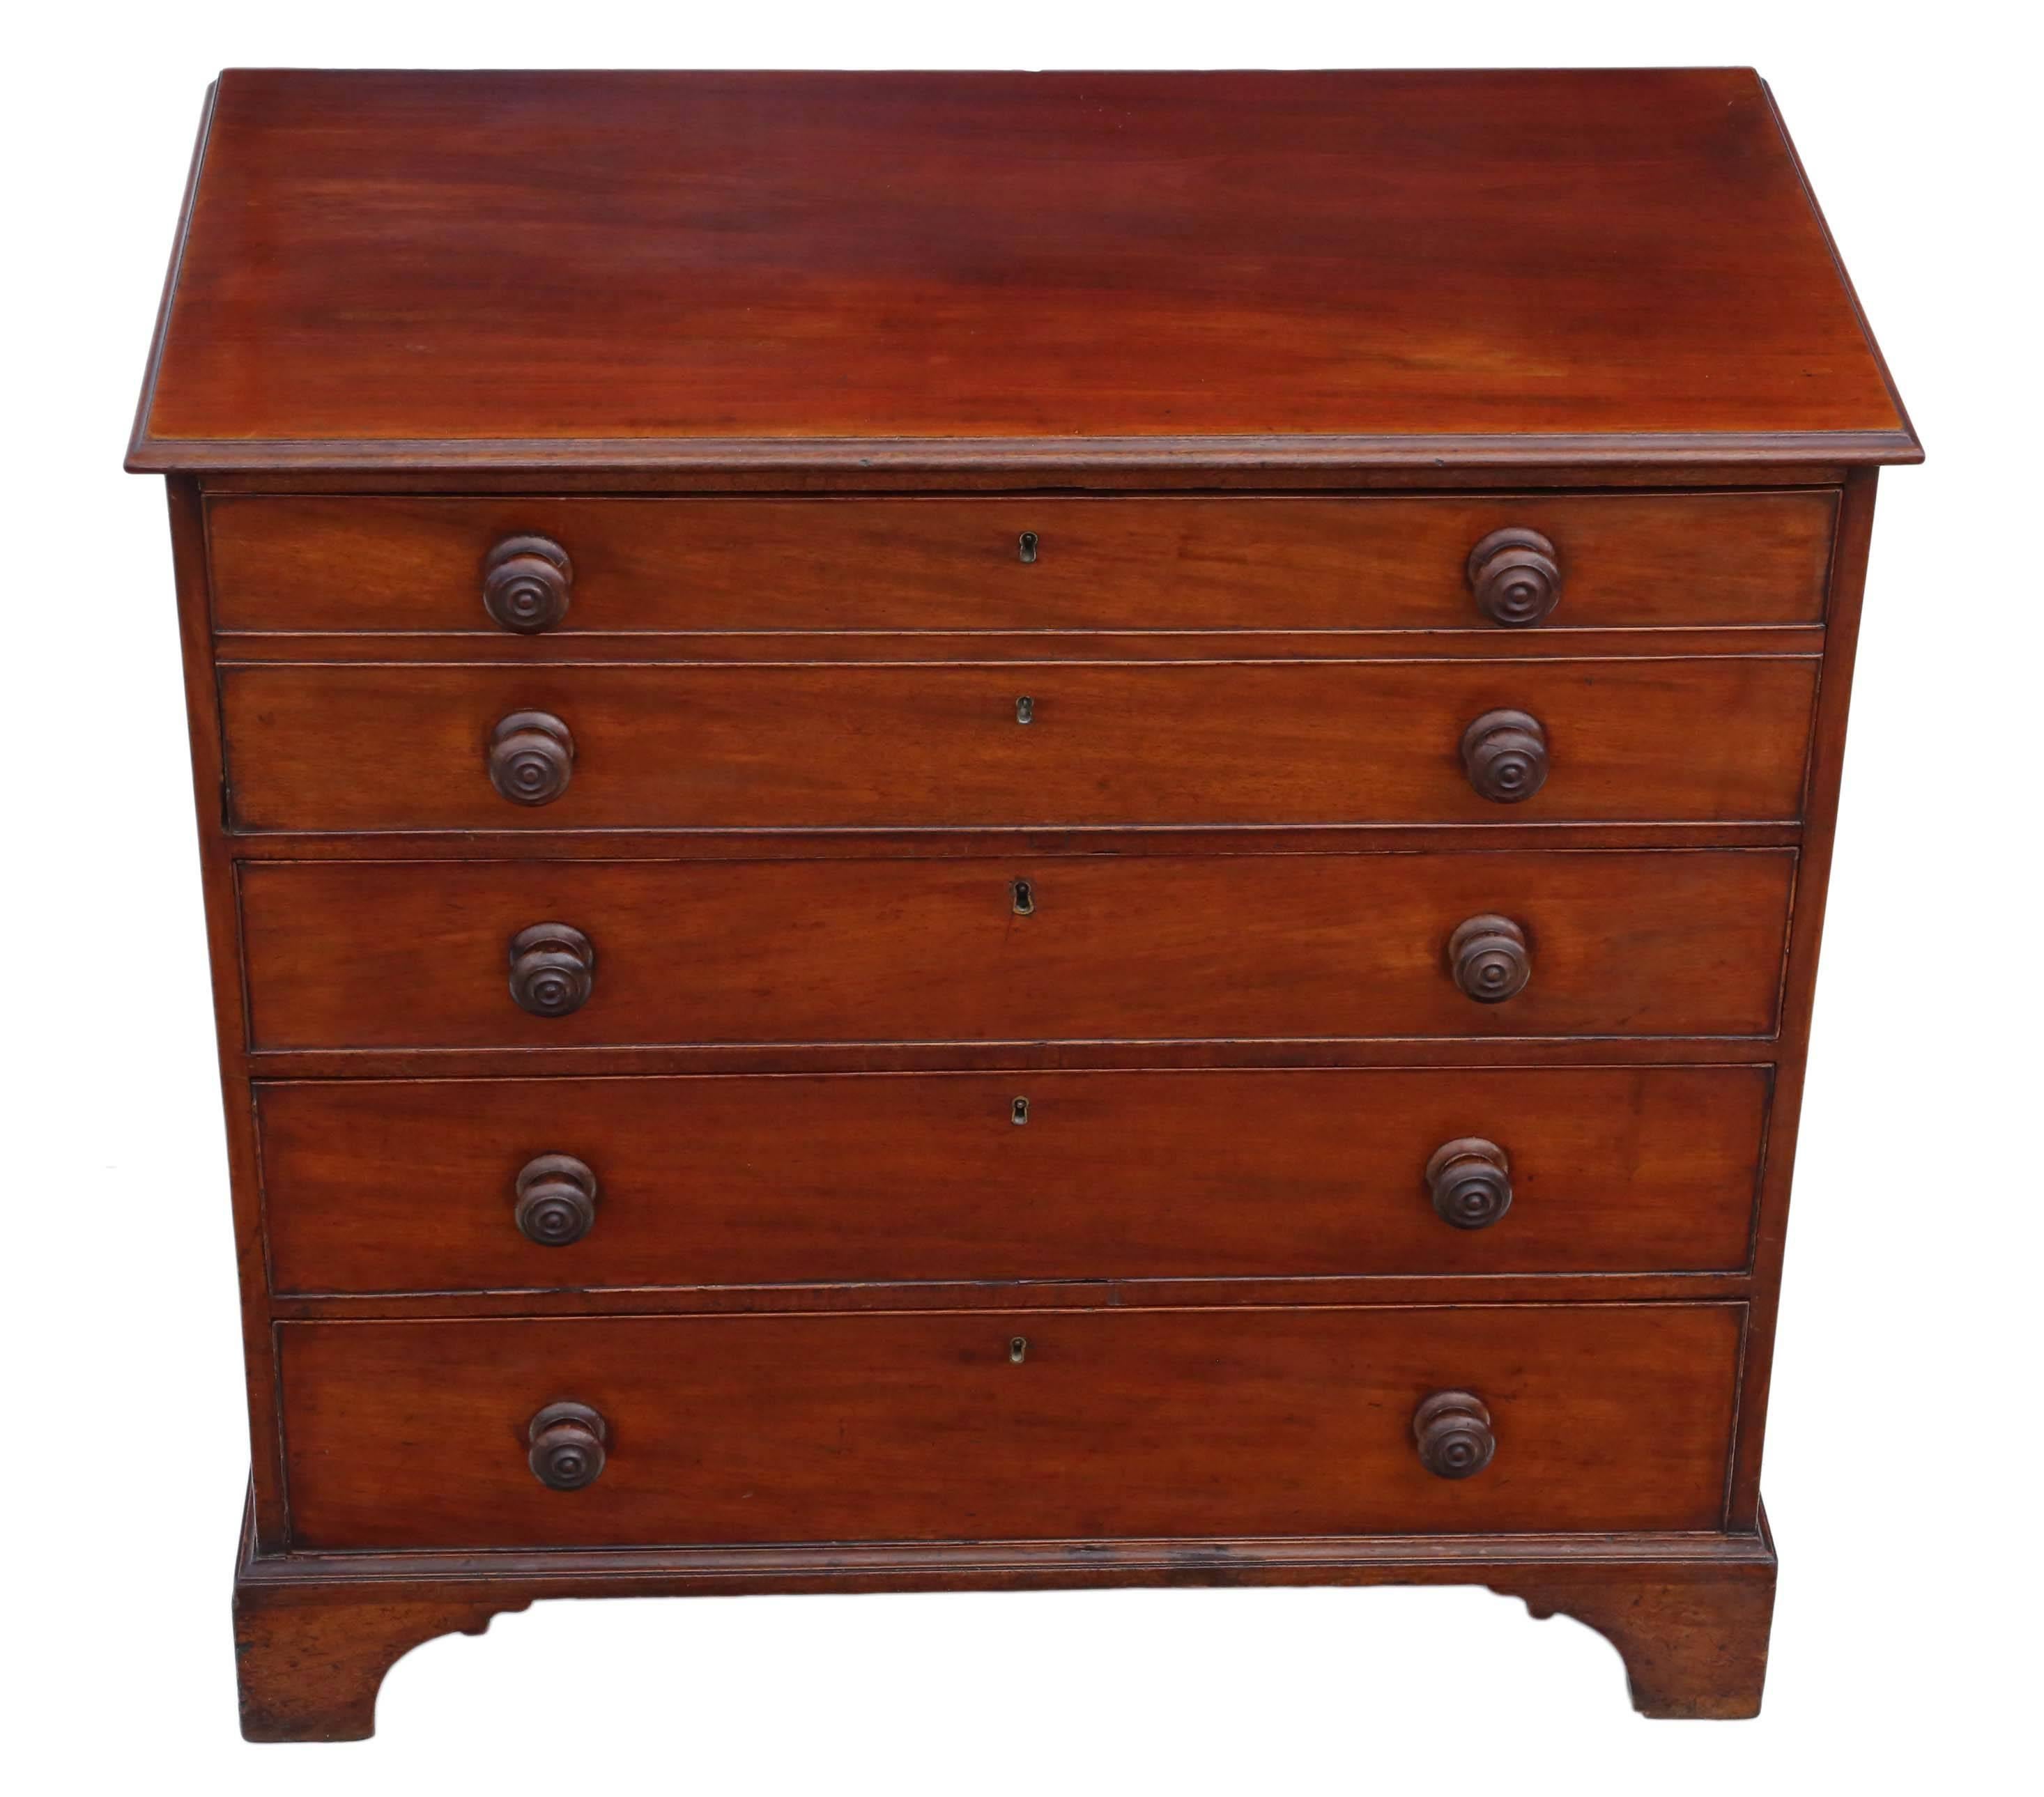 Antique Georgian mahogany secretaire desk writing table chest of drawers.

A lovely item, that is full of age, charm and character. Old patinated leatherette writing surface.

Solid with no loose joints and the oak lined drawers slide freely. No